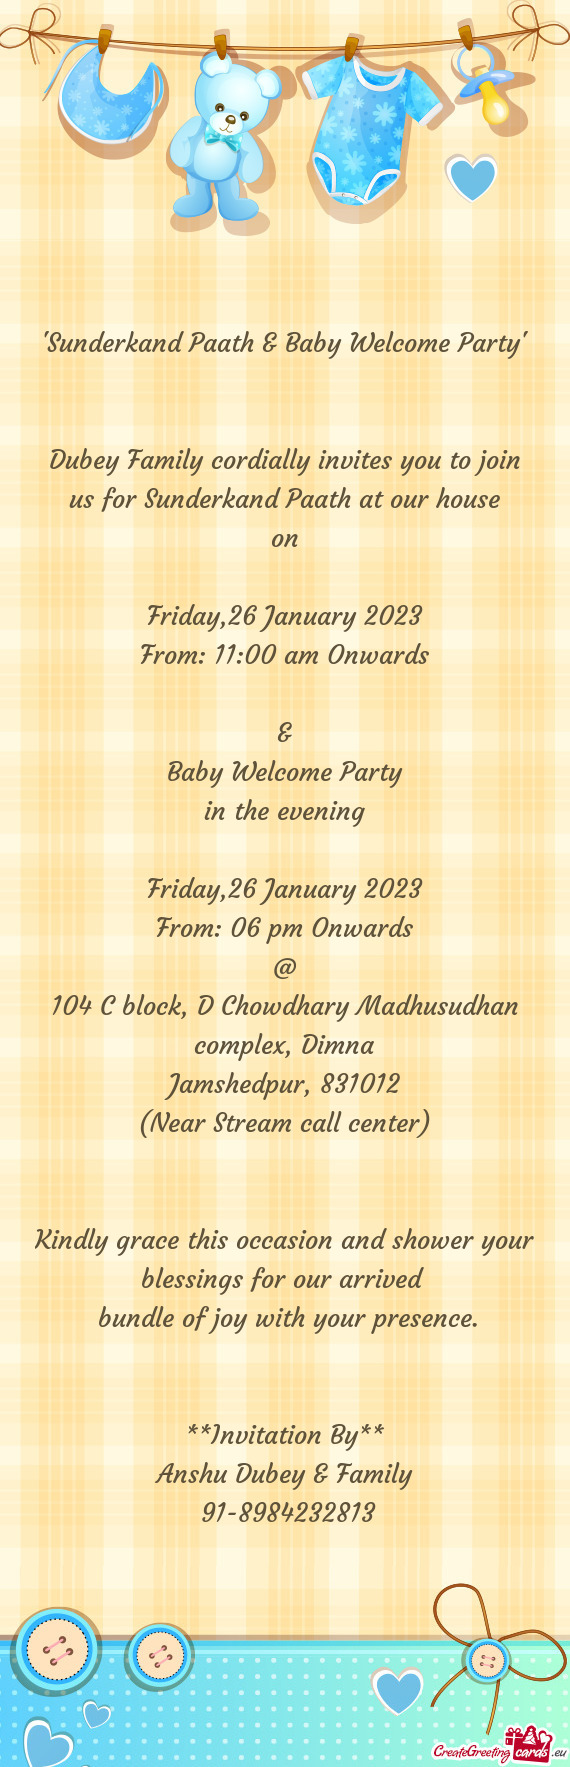 Dubey Family cordially invites you to join us for Sunderkand Paath at our house